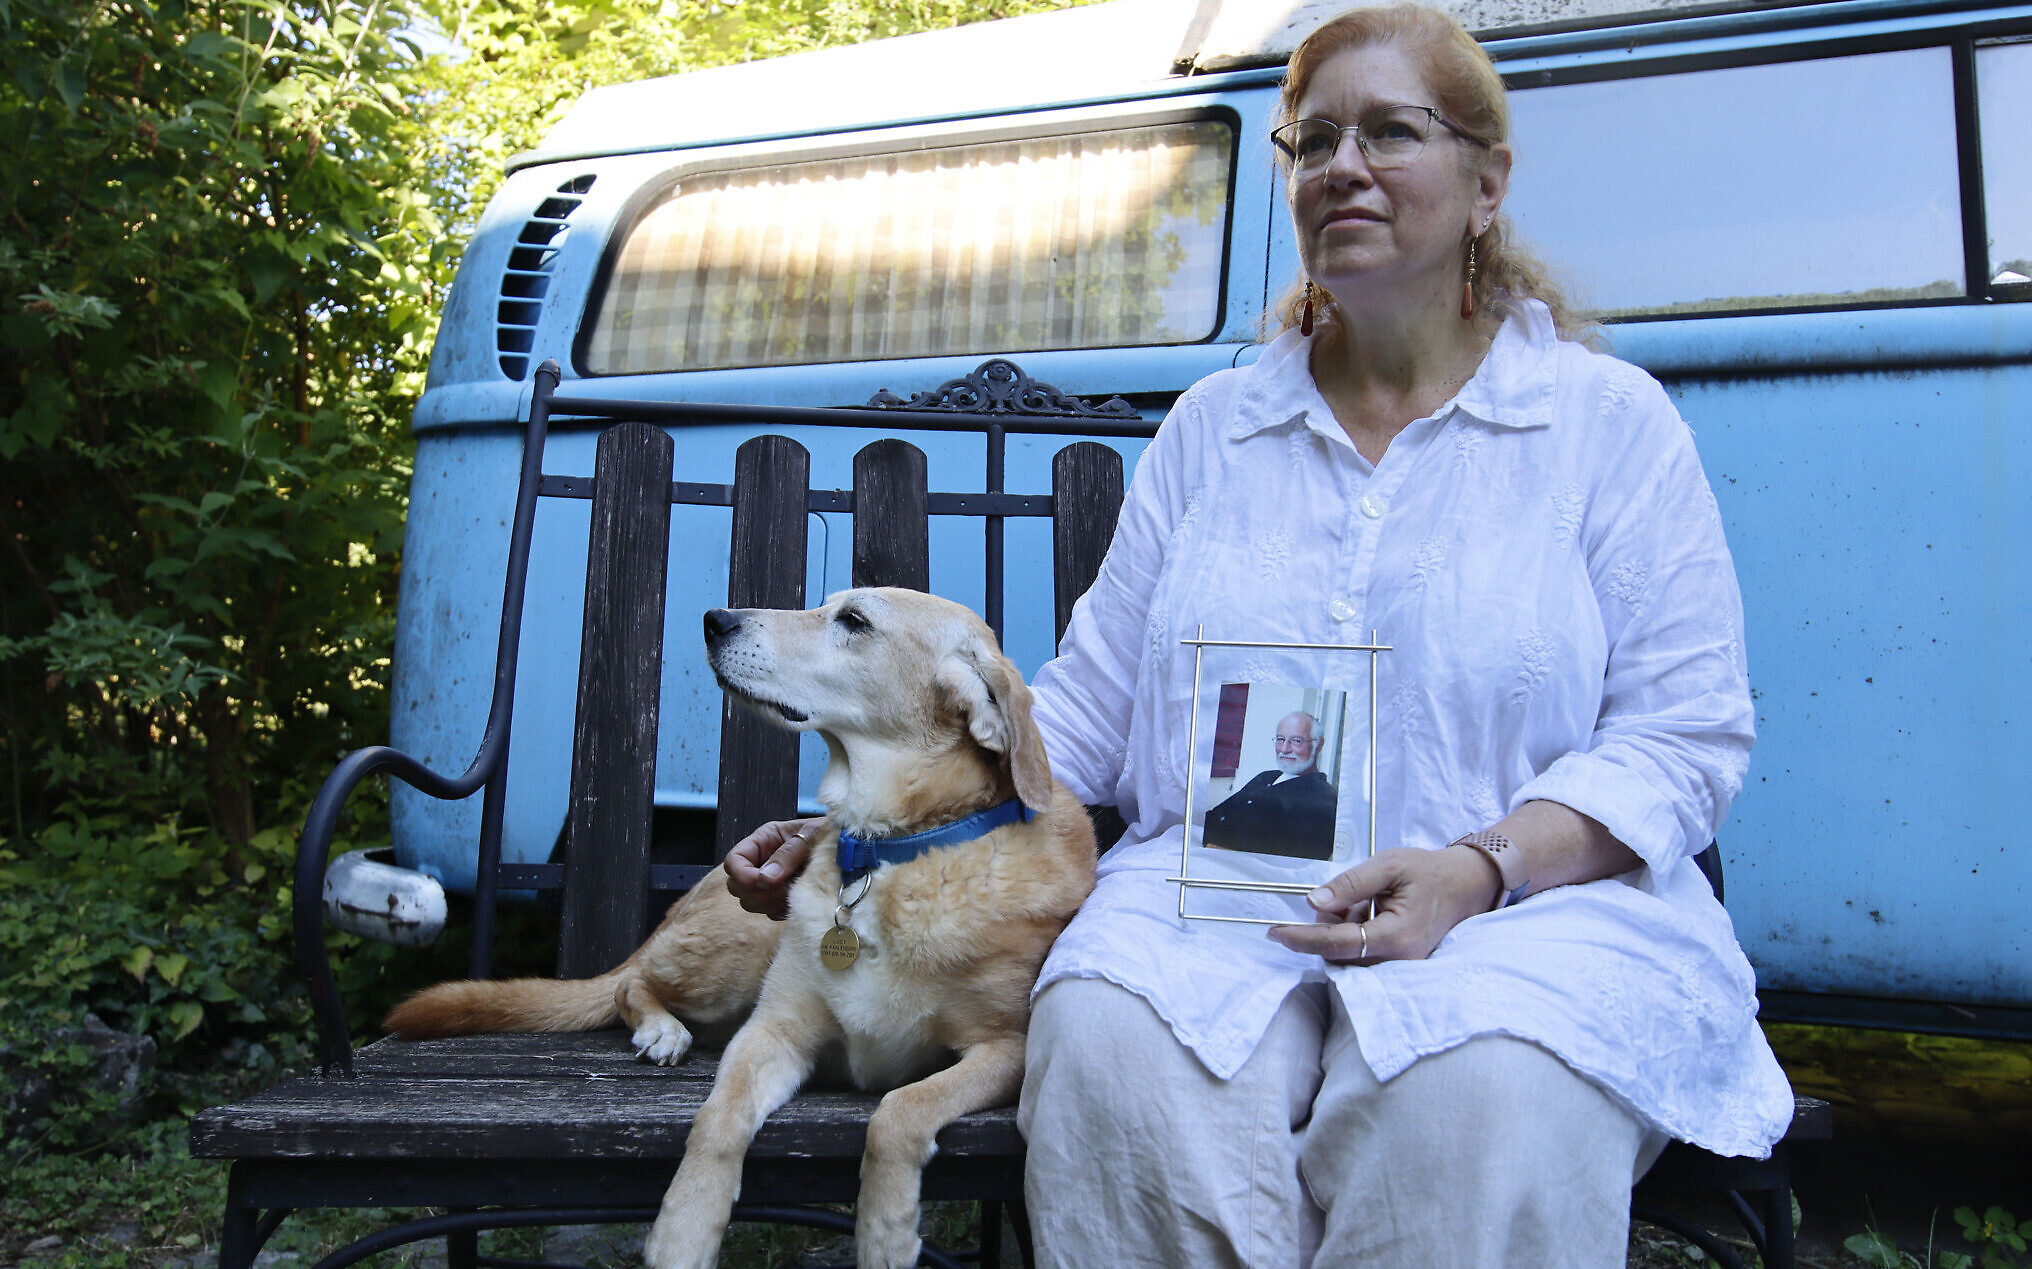 Giuliana Schnitzler sits with her dog Lucy while displaying an image of her father, Peter Schnitzler, at her home in Vienna, Austria, on June 23, 2022. Her father was taken out of Vienna to the United States by his family at just under 2 years old in late 1938. (Raquel G. Frohlich)